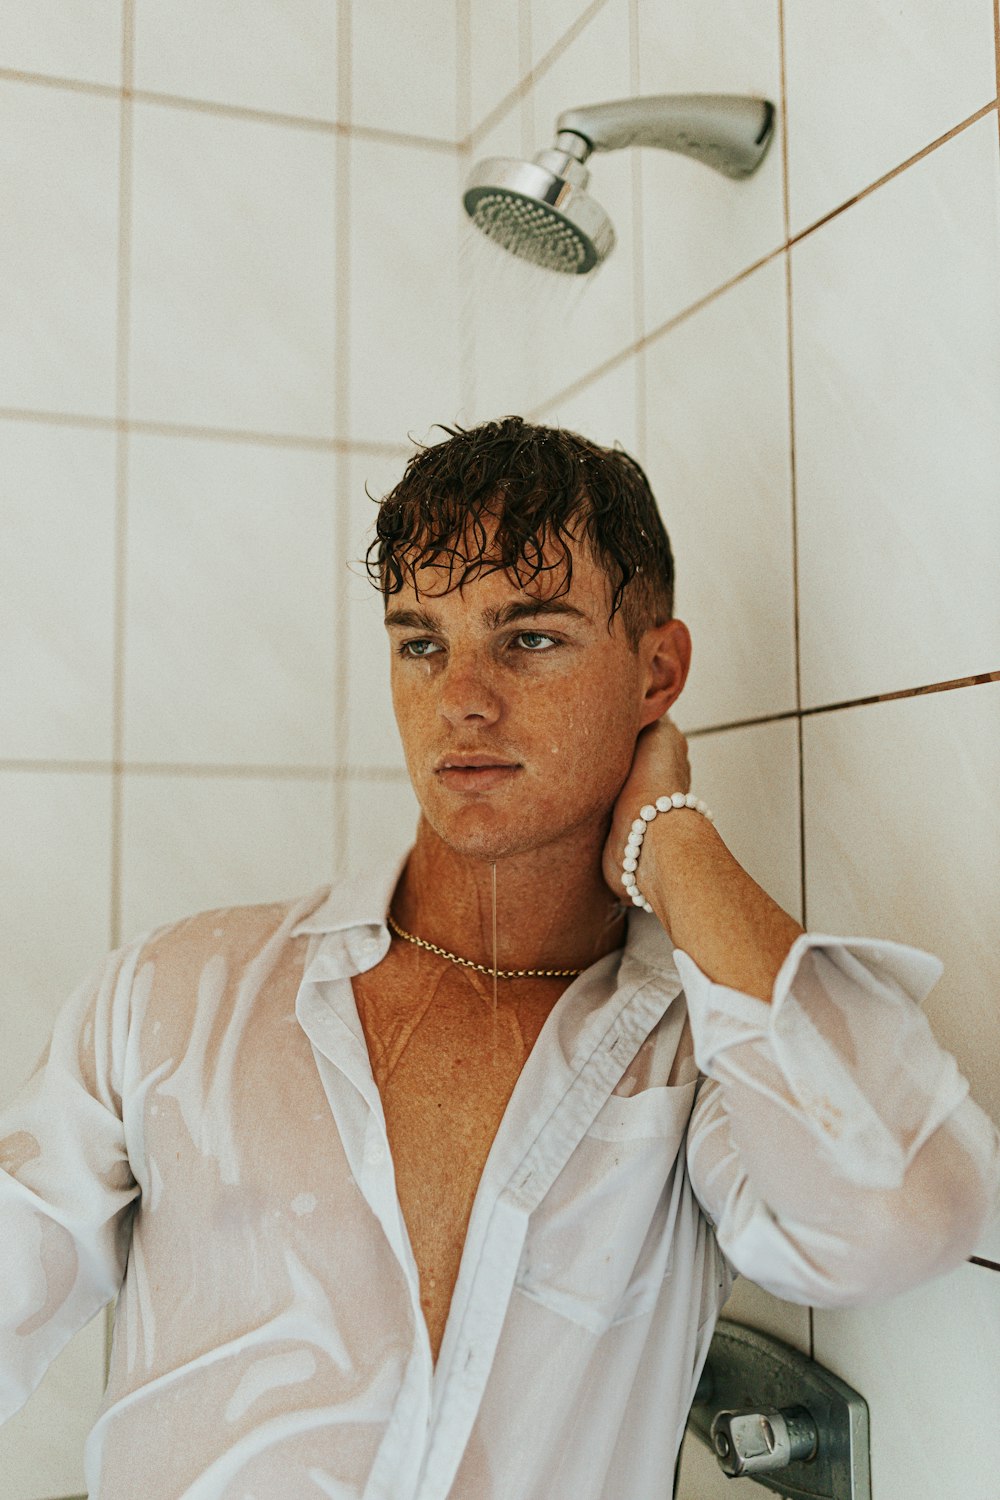 a man in a white shirt standing in a shower